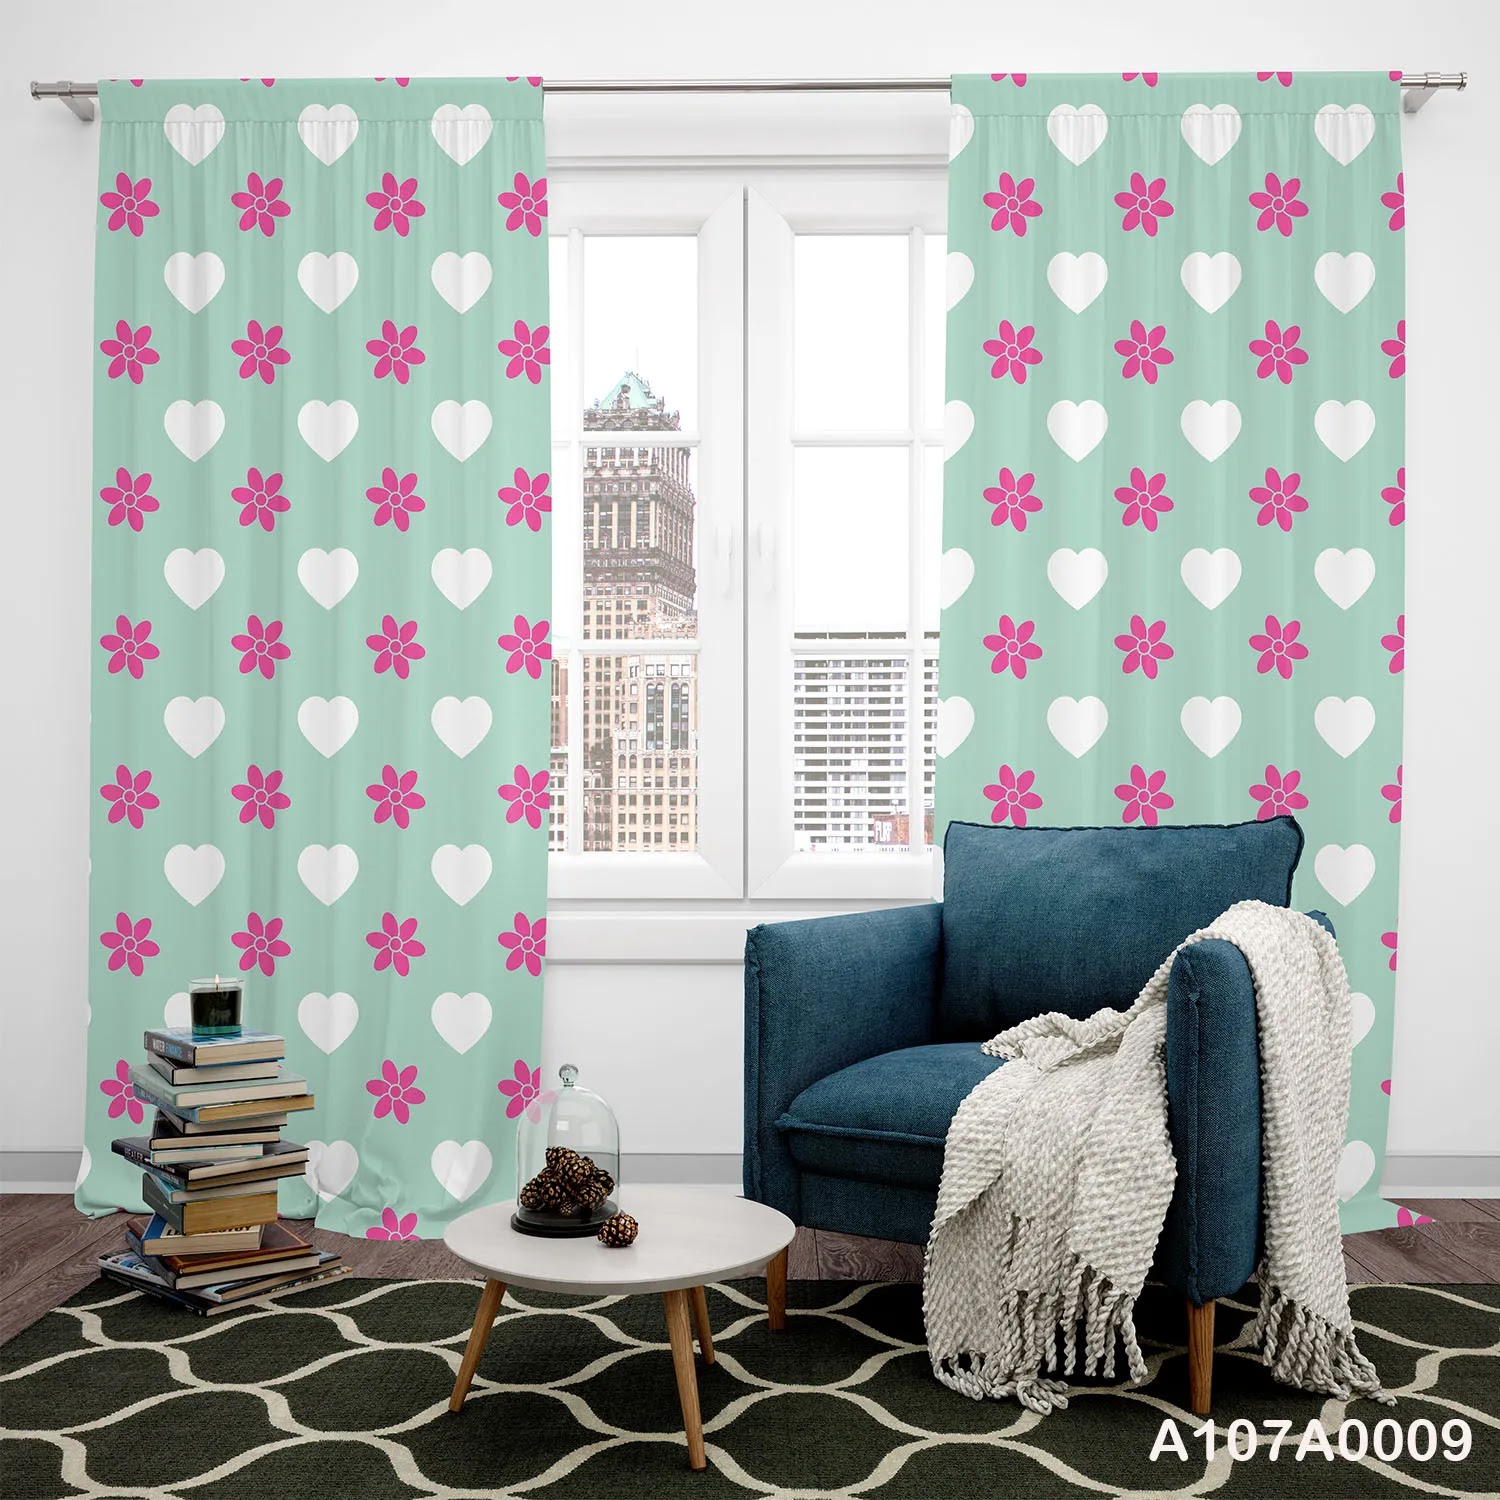 Curtains with white, green and pink color